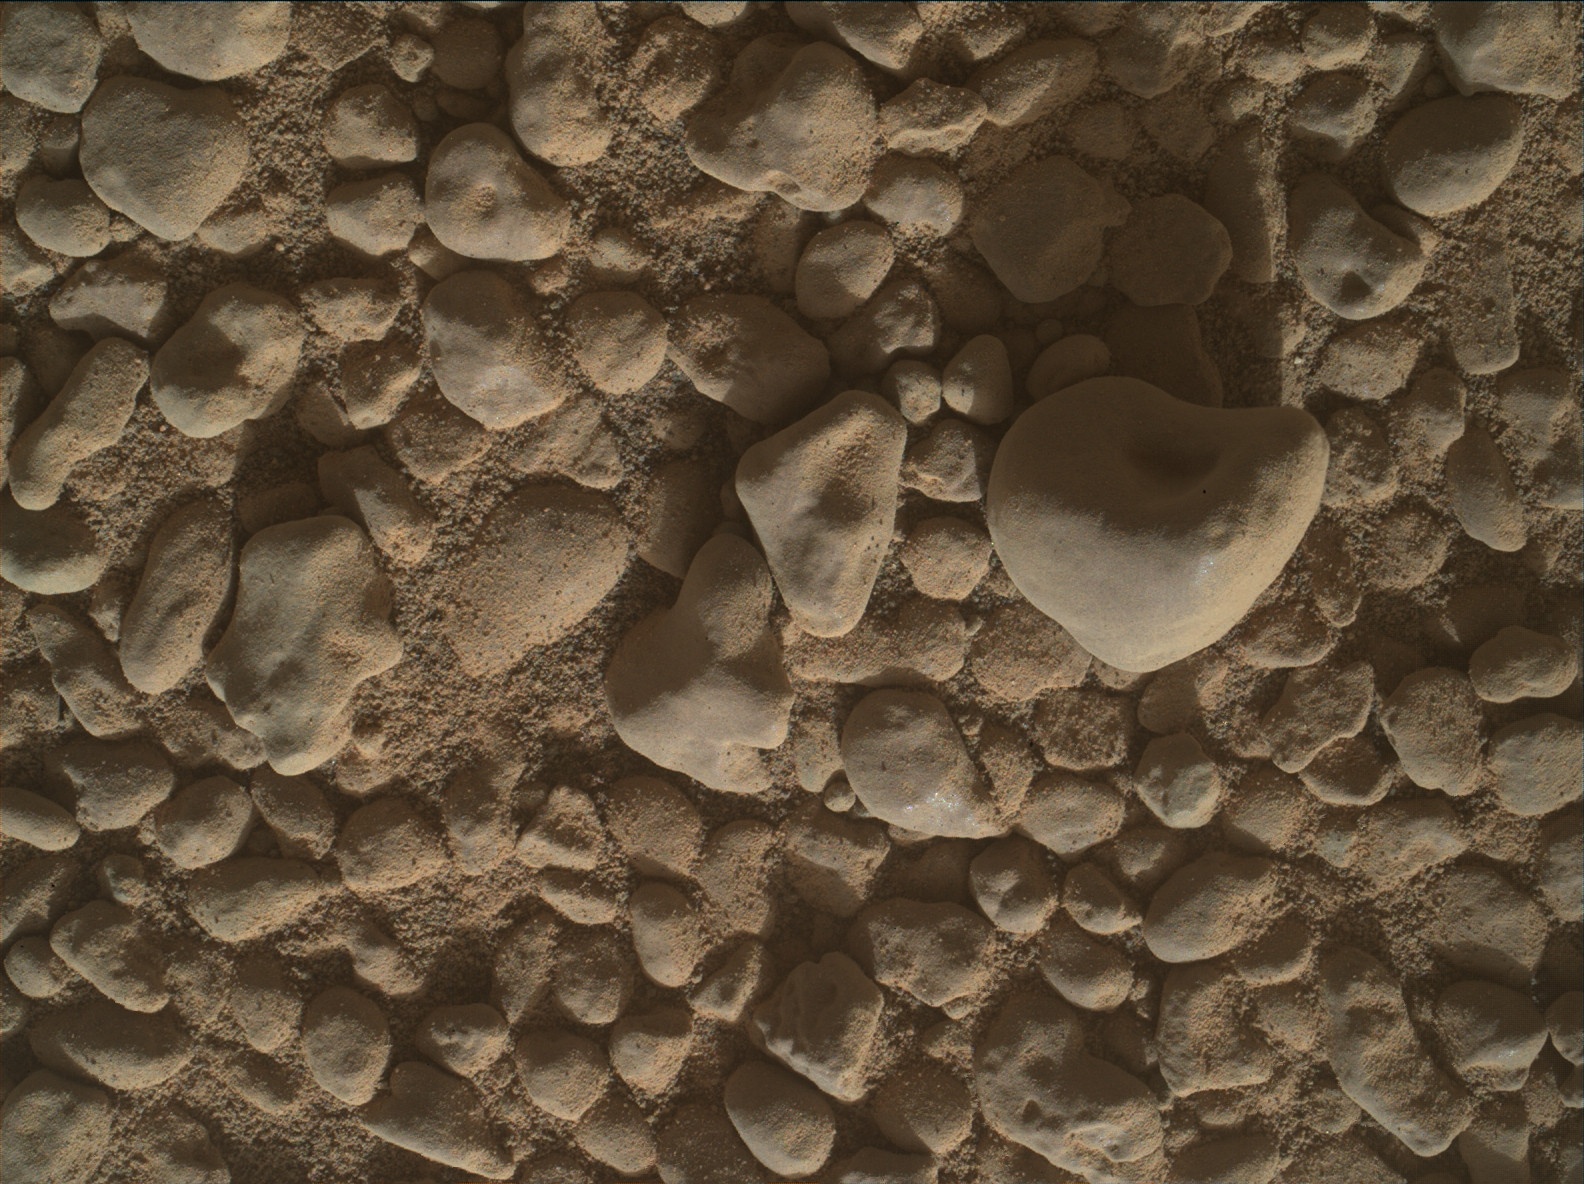 Nasa's Mars rover Curiosity acquired this image using its Mars Hand Lens Imager (MAHLI) on Sol 2559